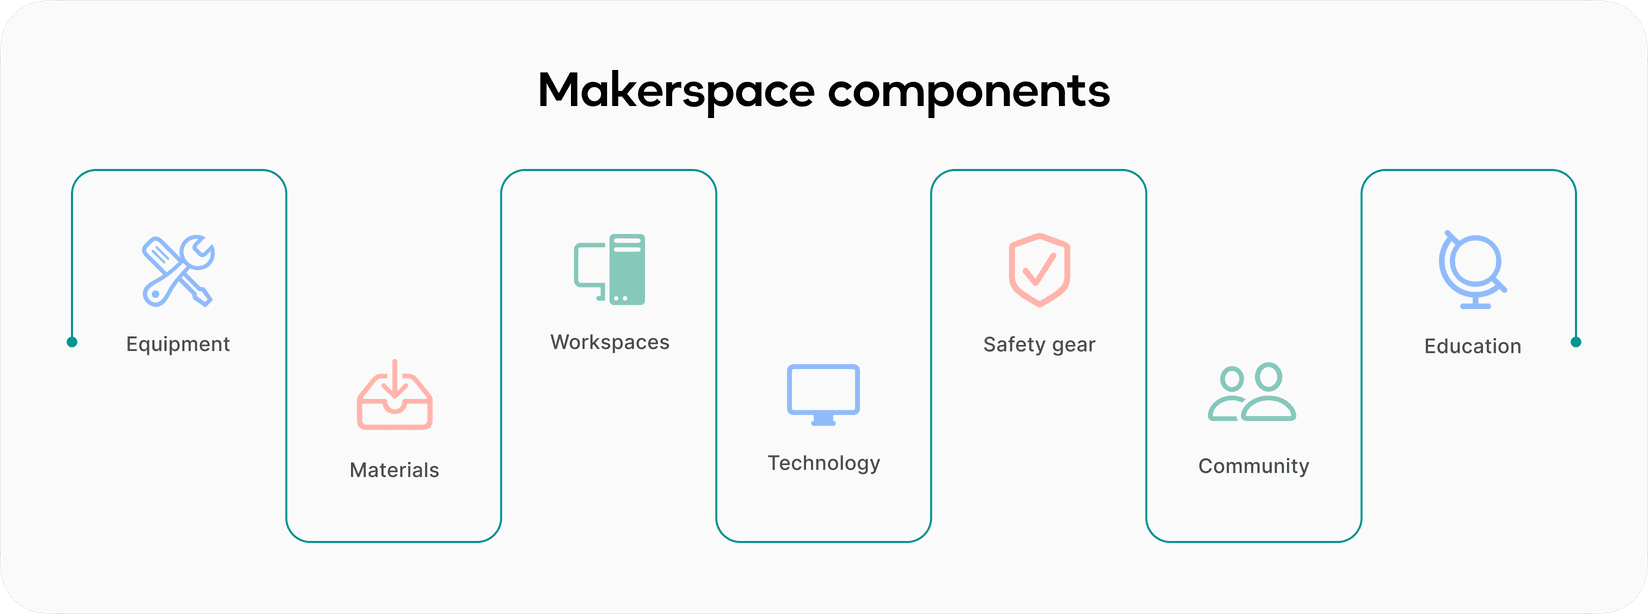 Makerspace components: guide to makerspaces in coworking environments